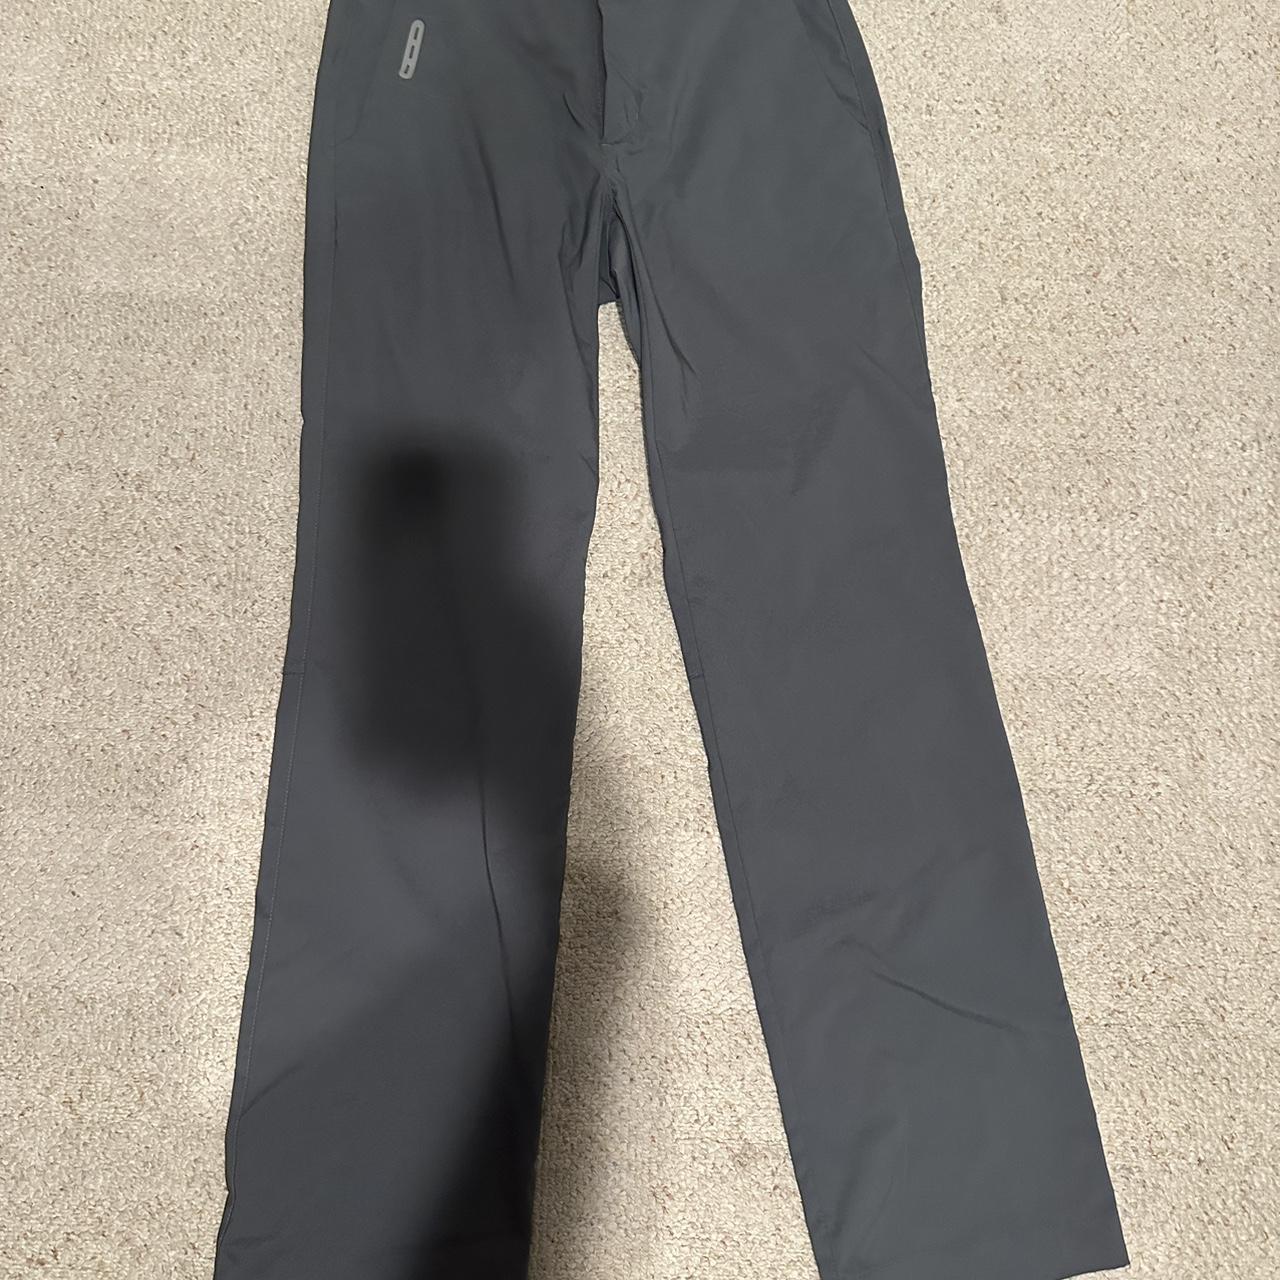 all in motion grey chino golf pants men's size 32W/32L - Depop